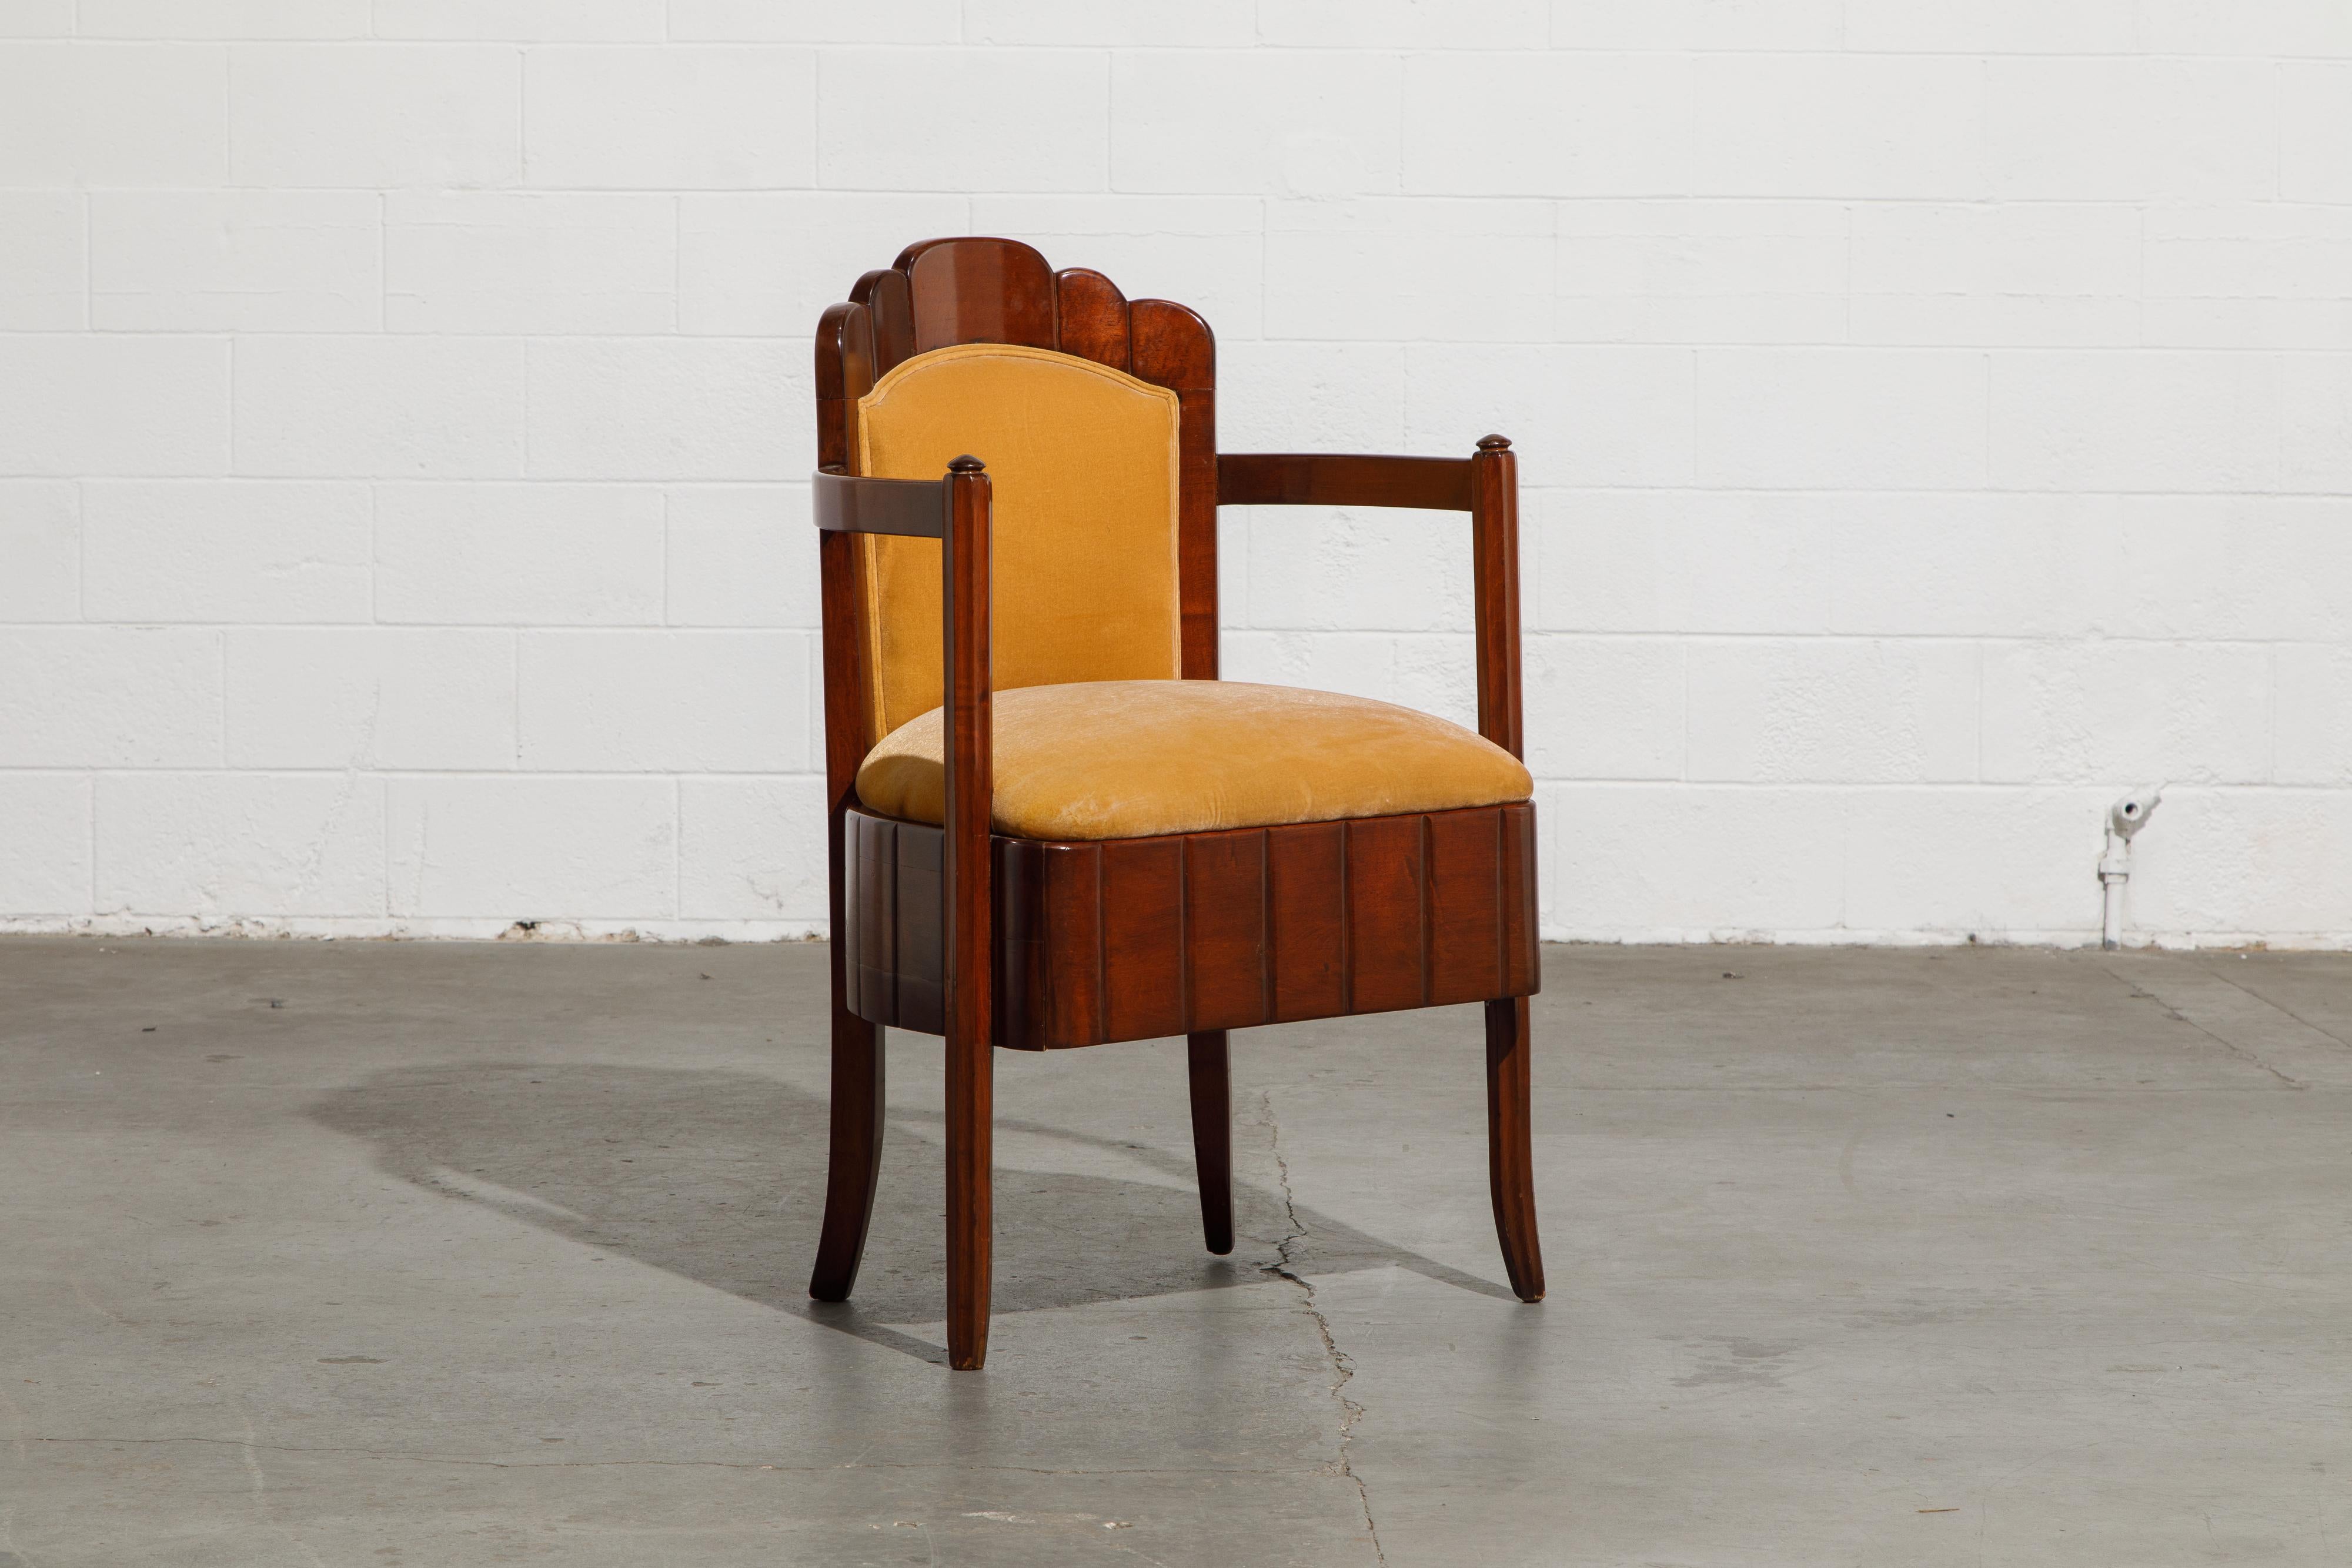 Important Pierre Patout Mahogany Dining Chairs from S.S. Île de France, c. 1927 For Sale 2